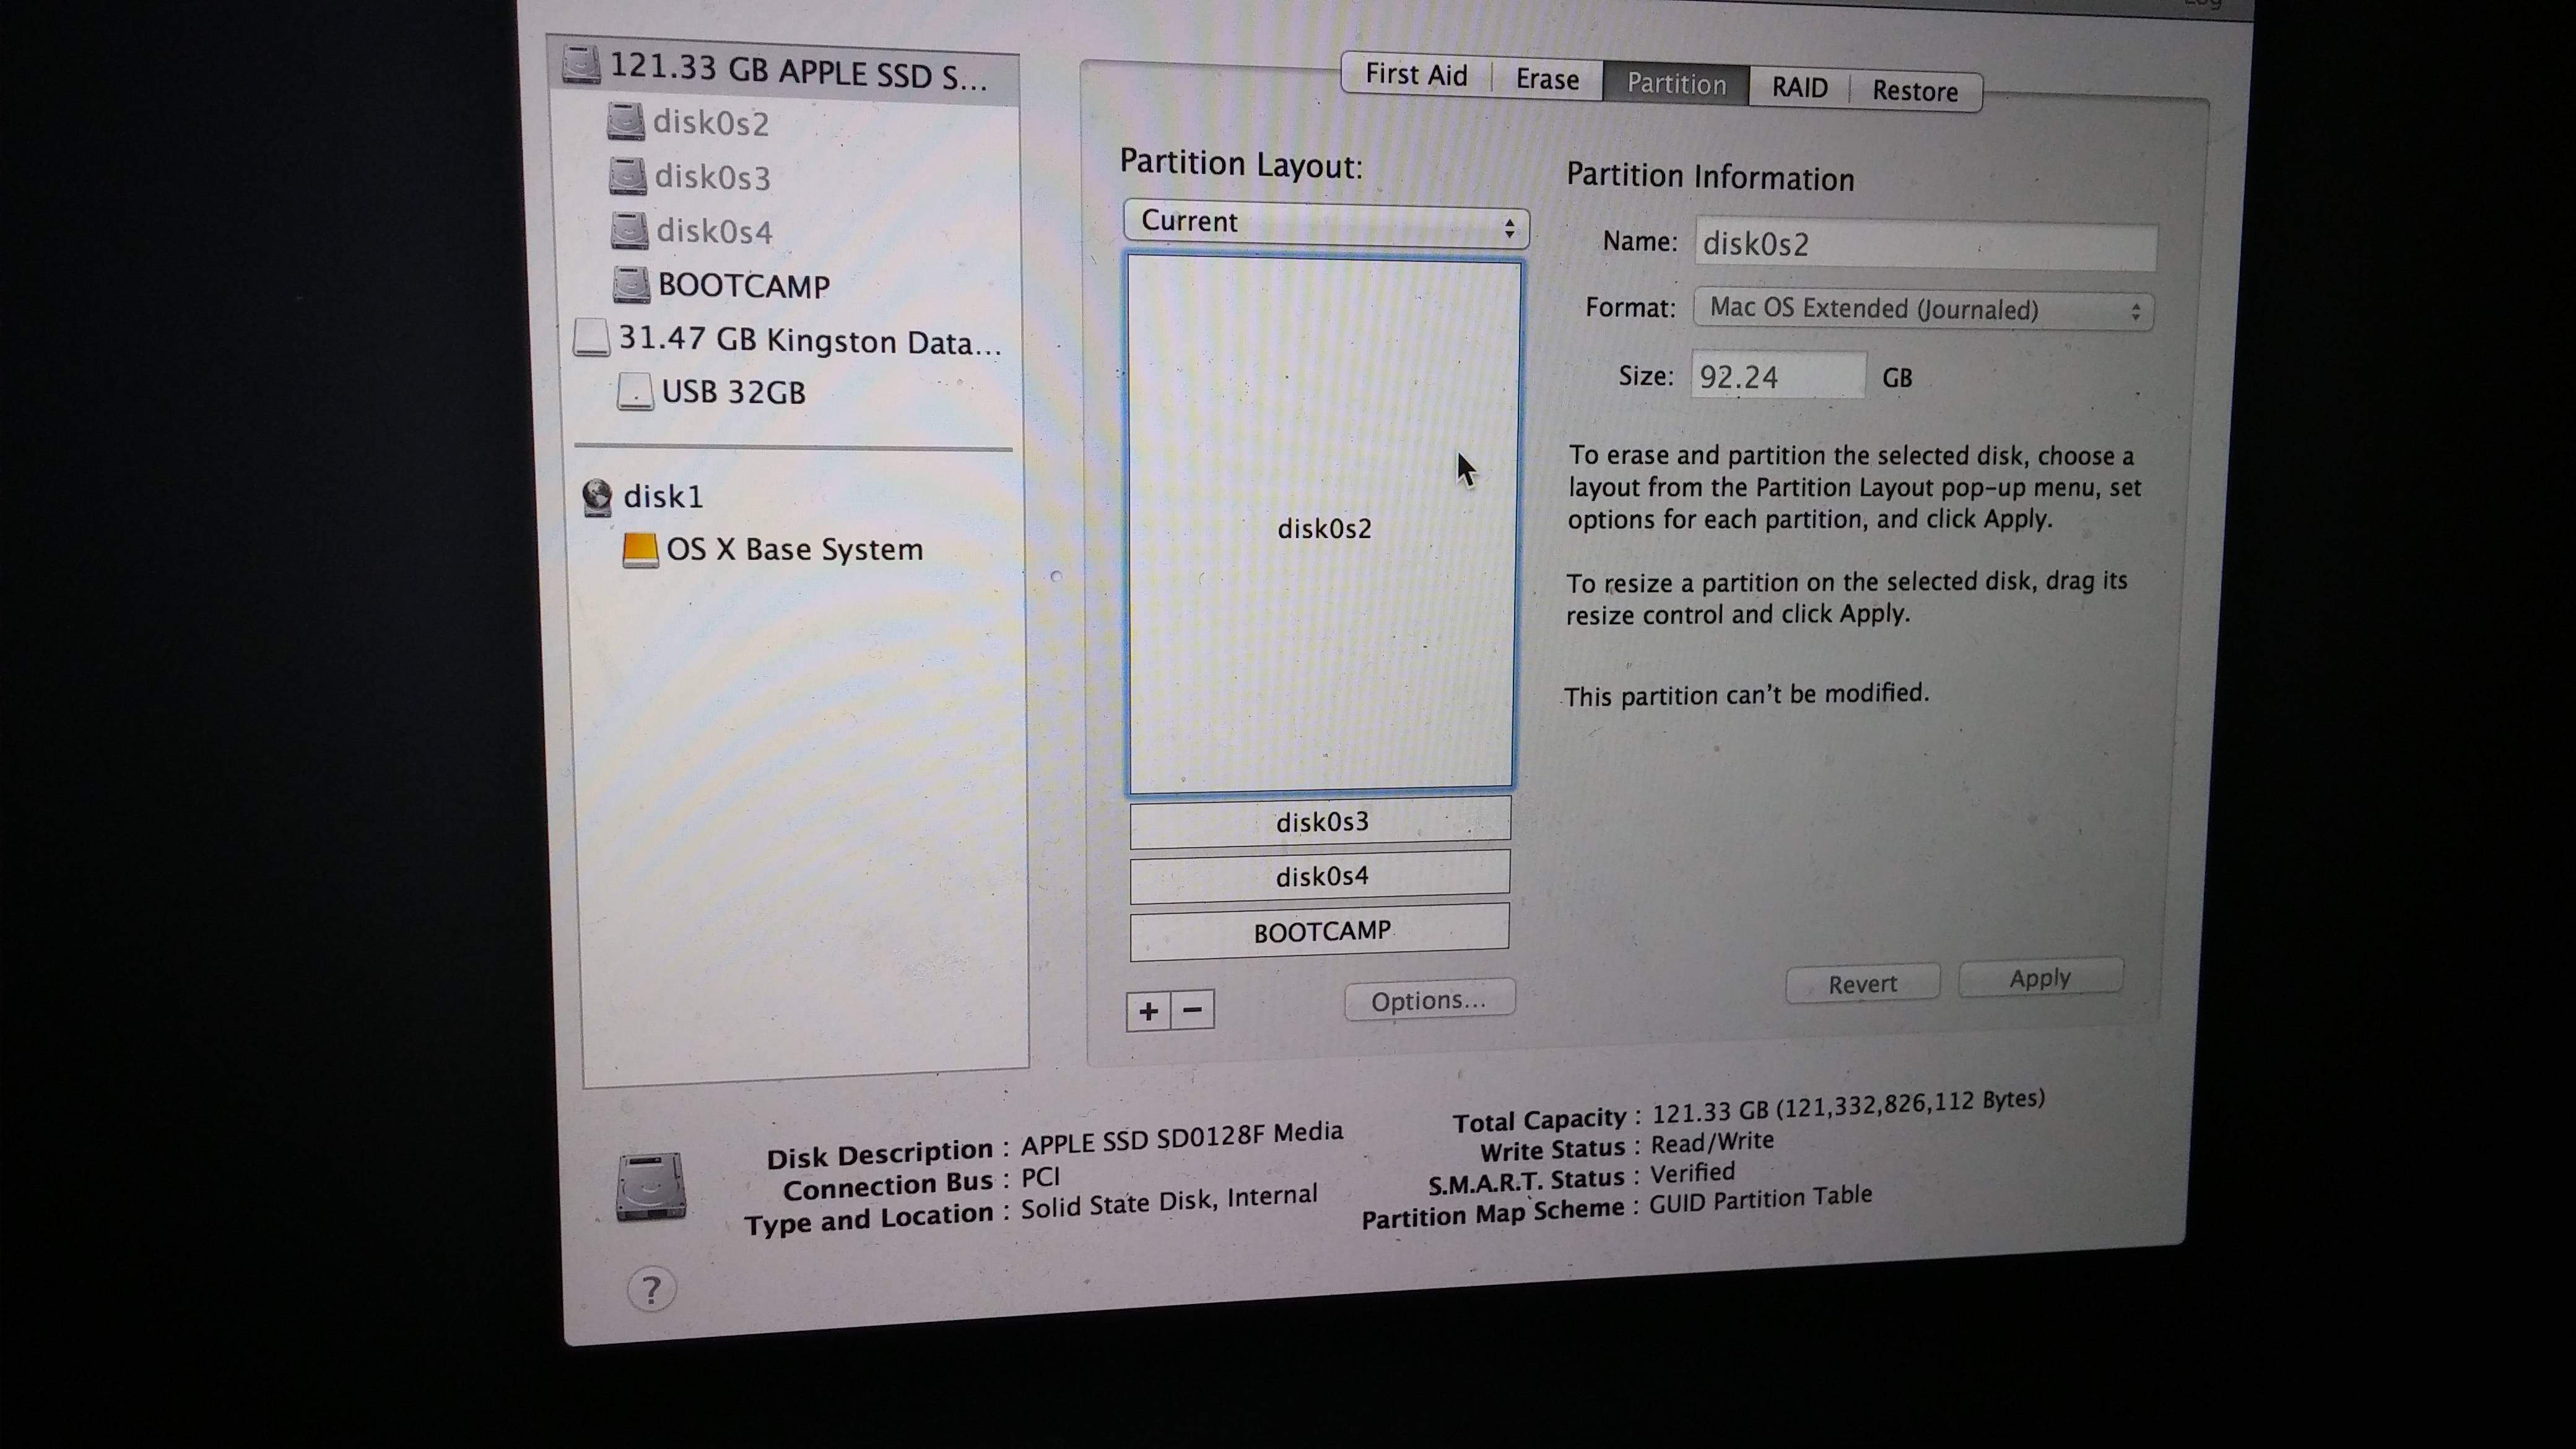 disk utility for mac not found on macbook pro